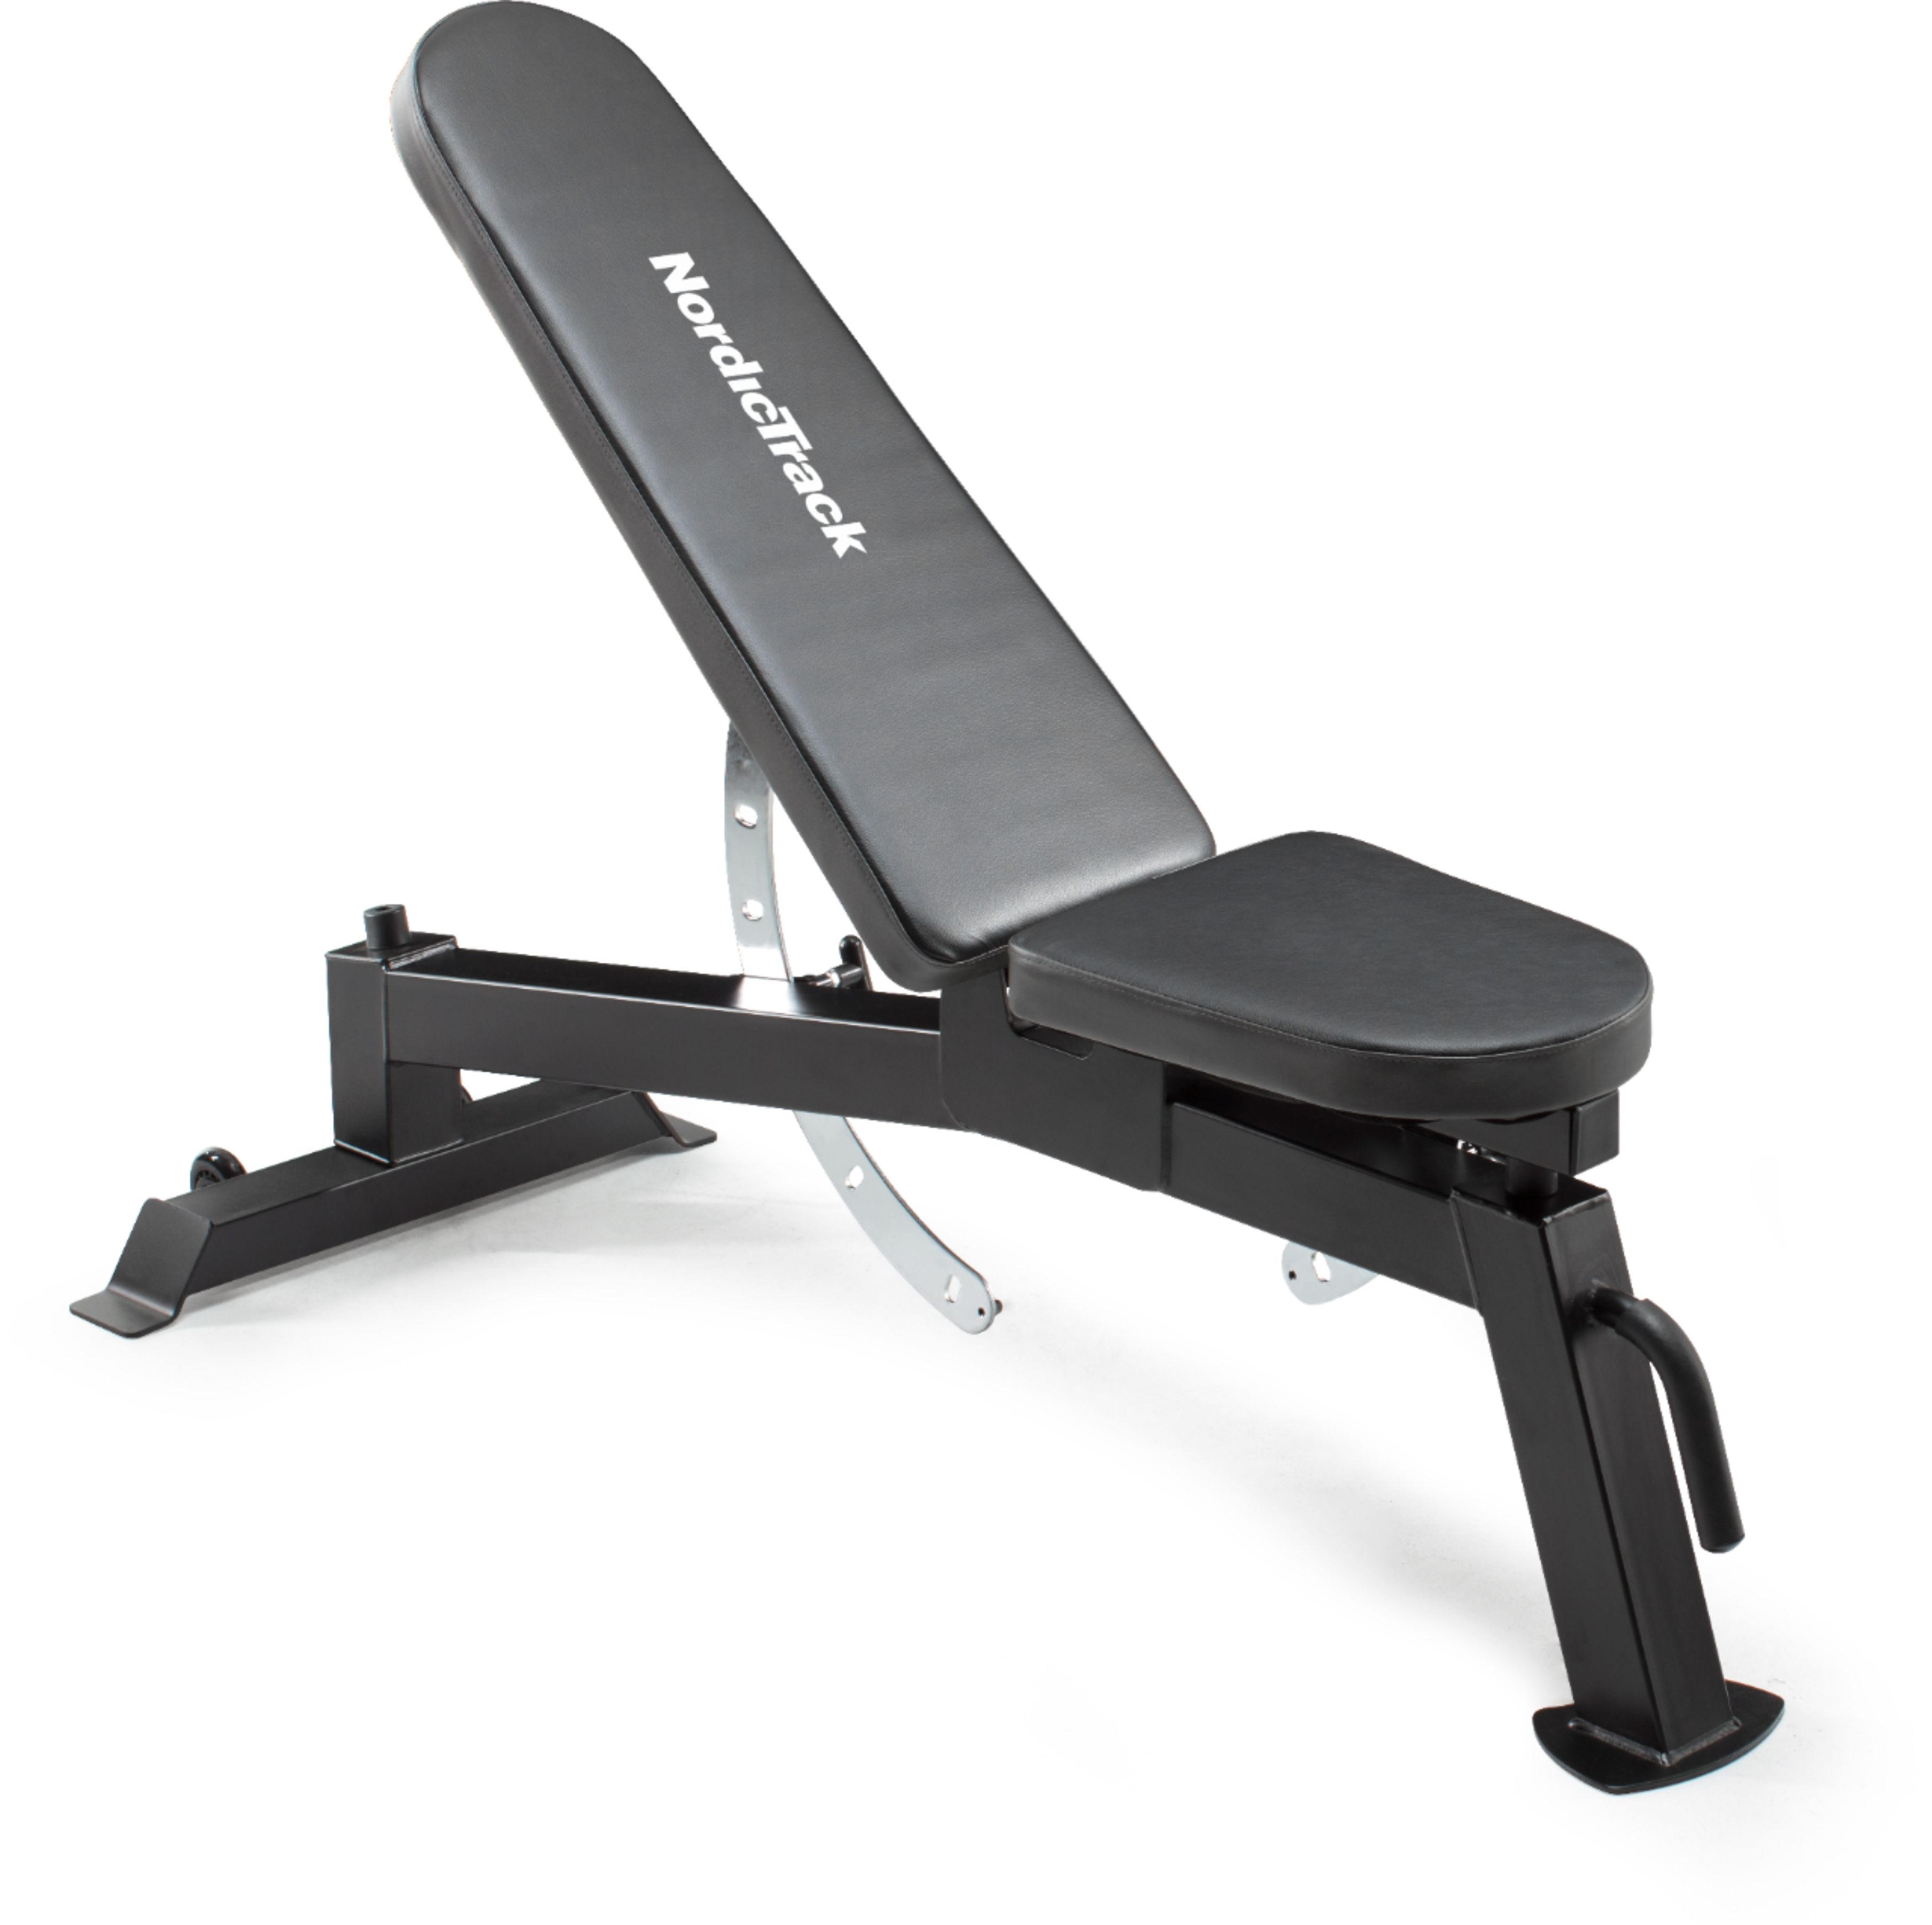 Angle View: NordicTrack - Dumbbell Stand - Gray